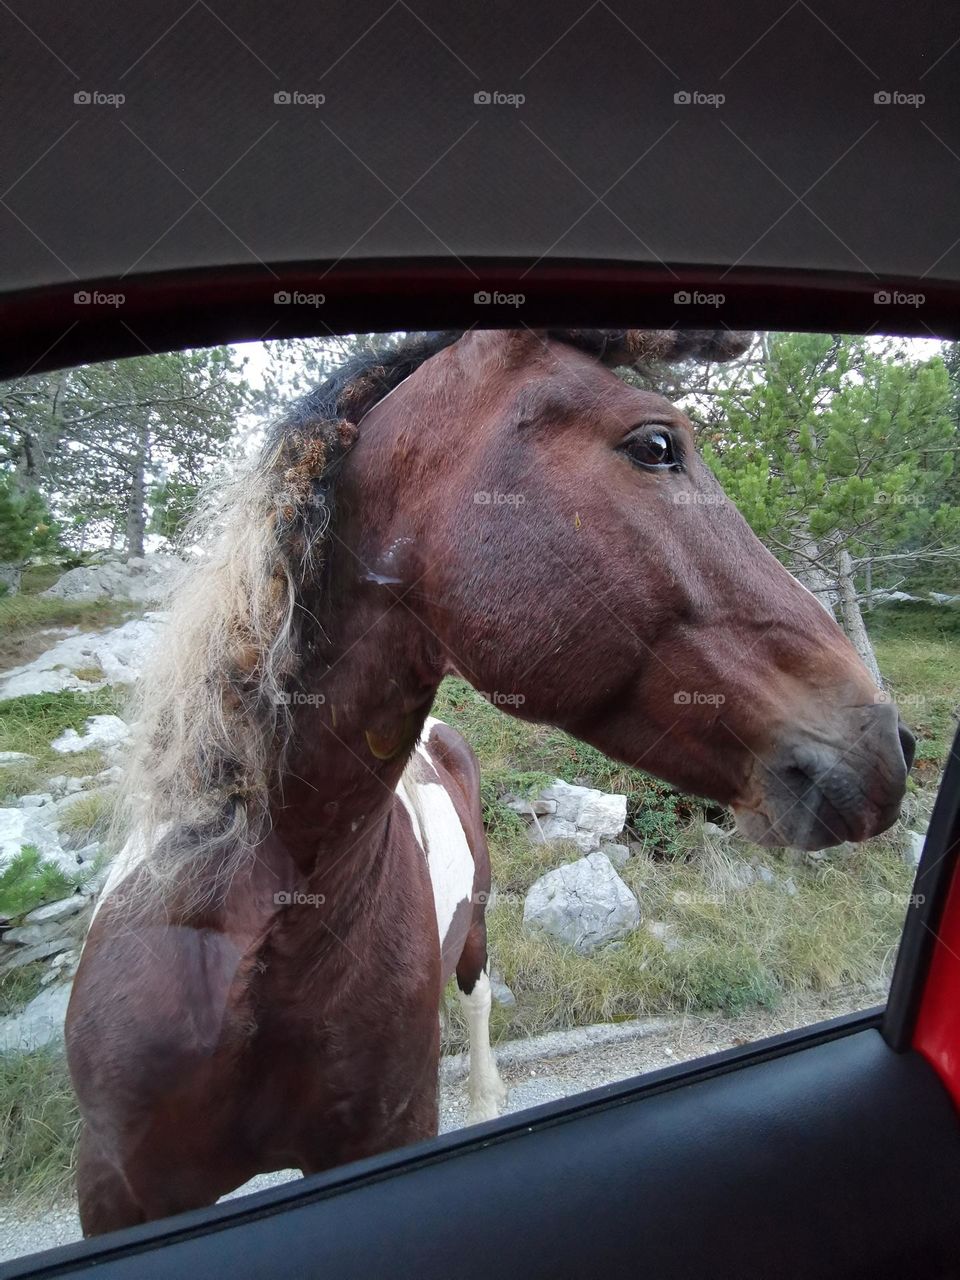 Nice horse portrait. The horse looks at us through the glass of the car.